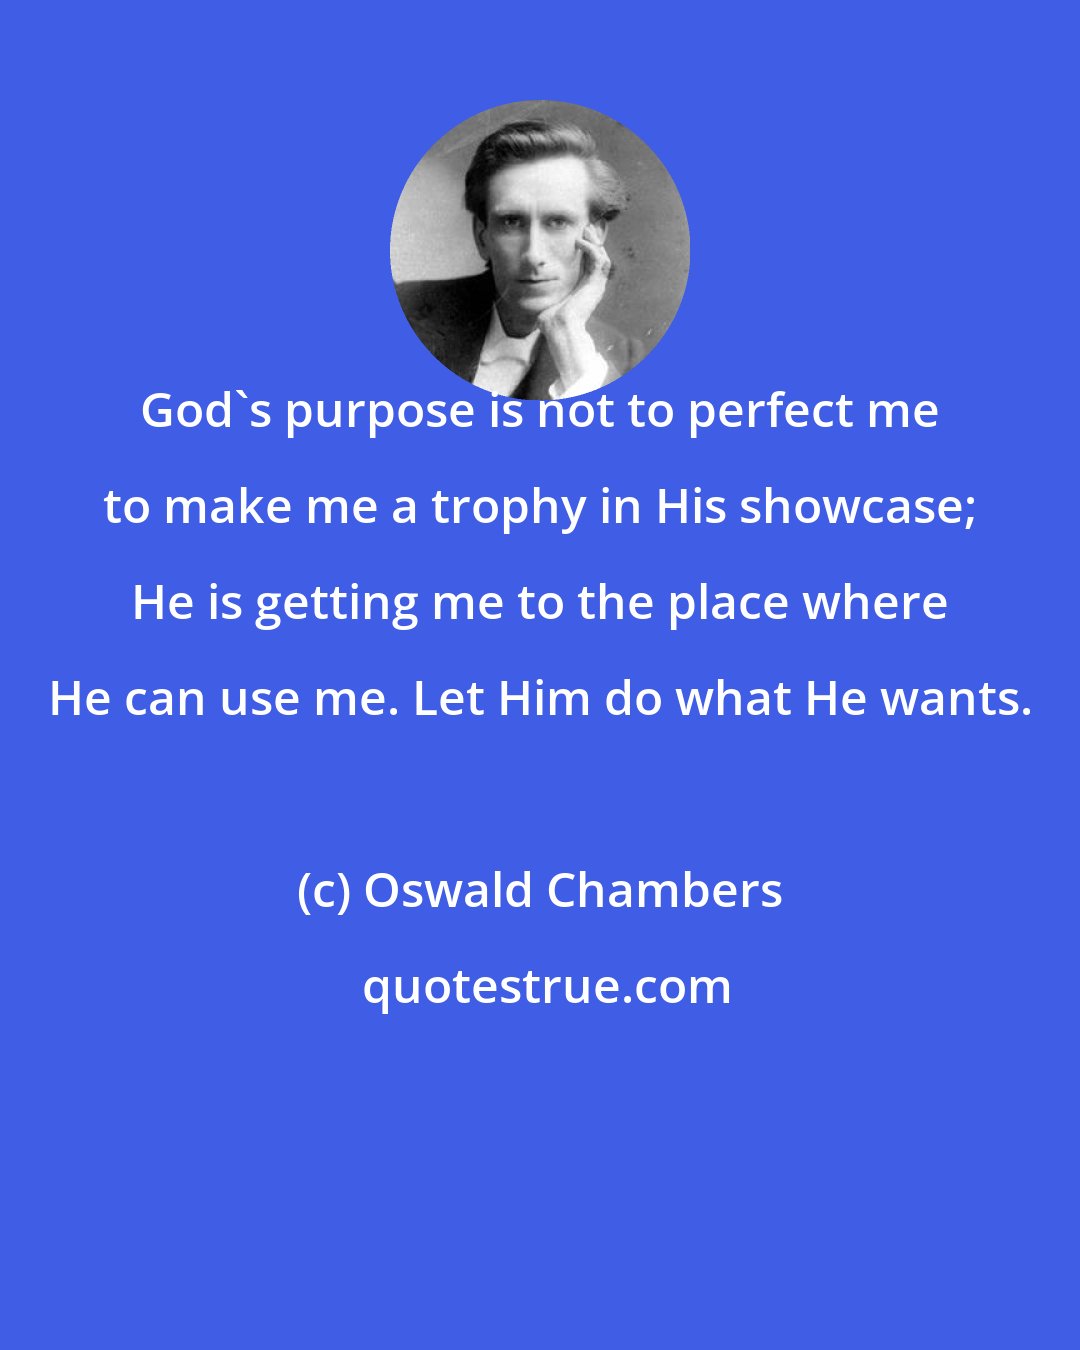 Oswald Chambers: God's purpose is not to perfect me to make me a trophy in His showcase; He is getting me to the place where He can use me. Let Him do what He wants.